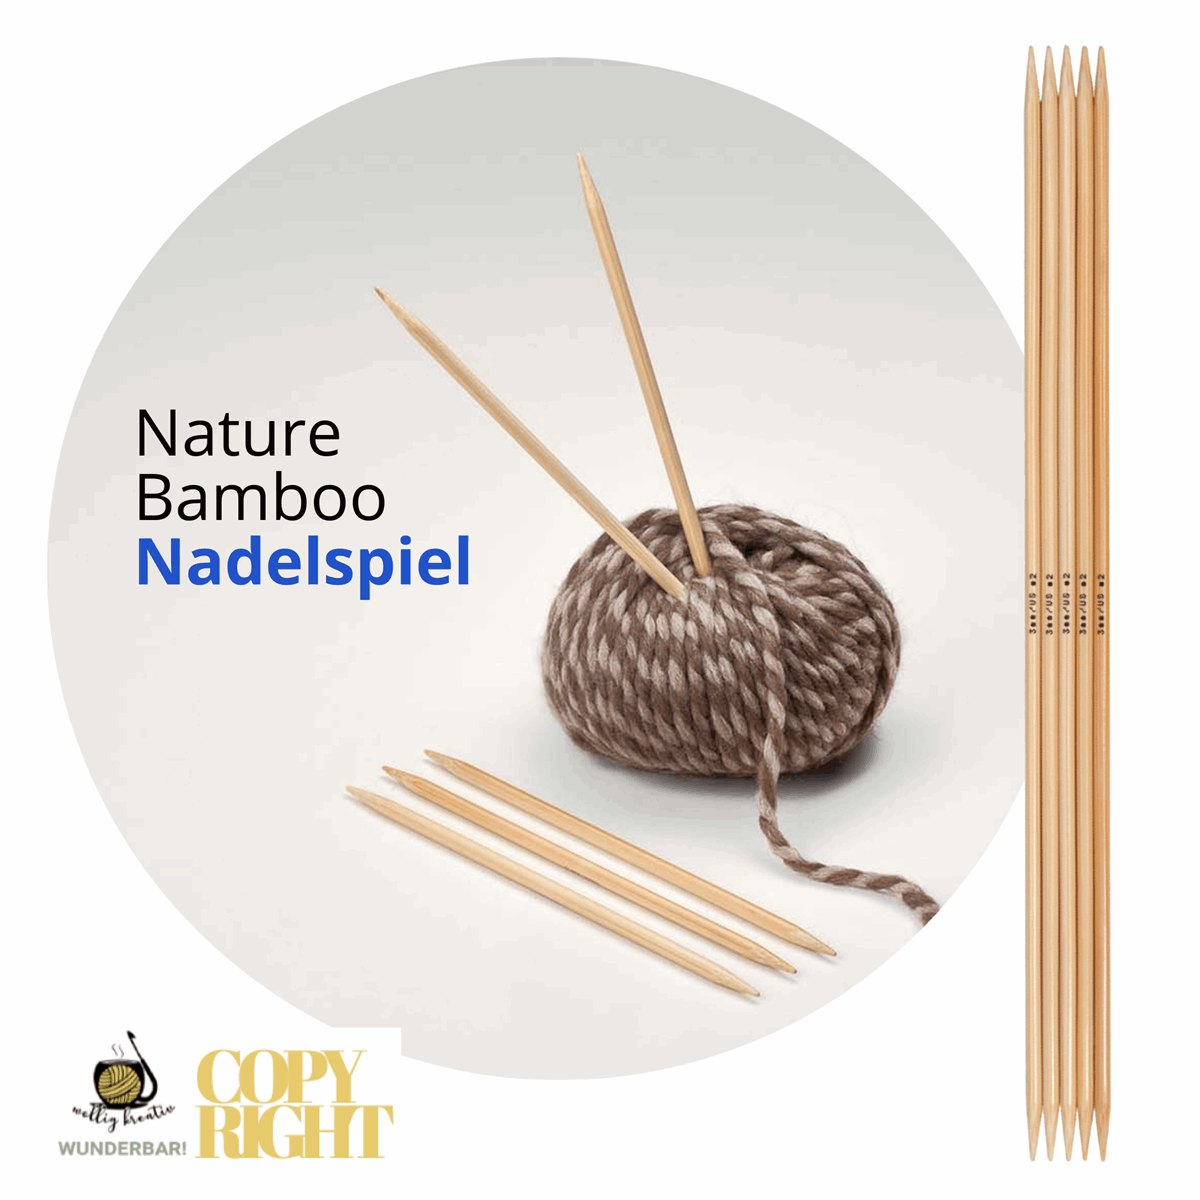 Addi, Nature Bamboo double pointed needles, 65012, size 3 length 15 cm